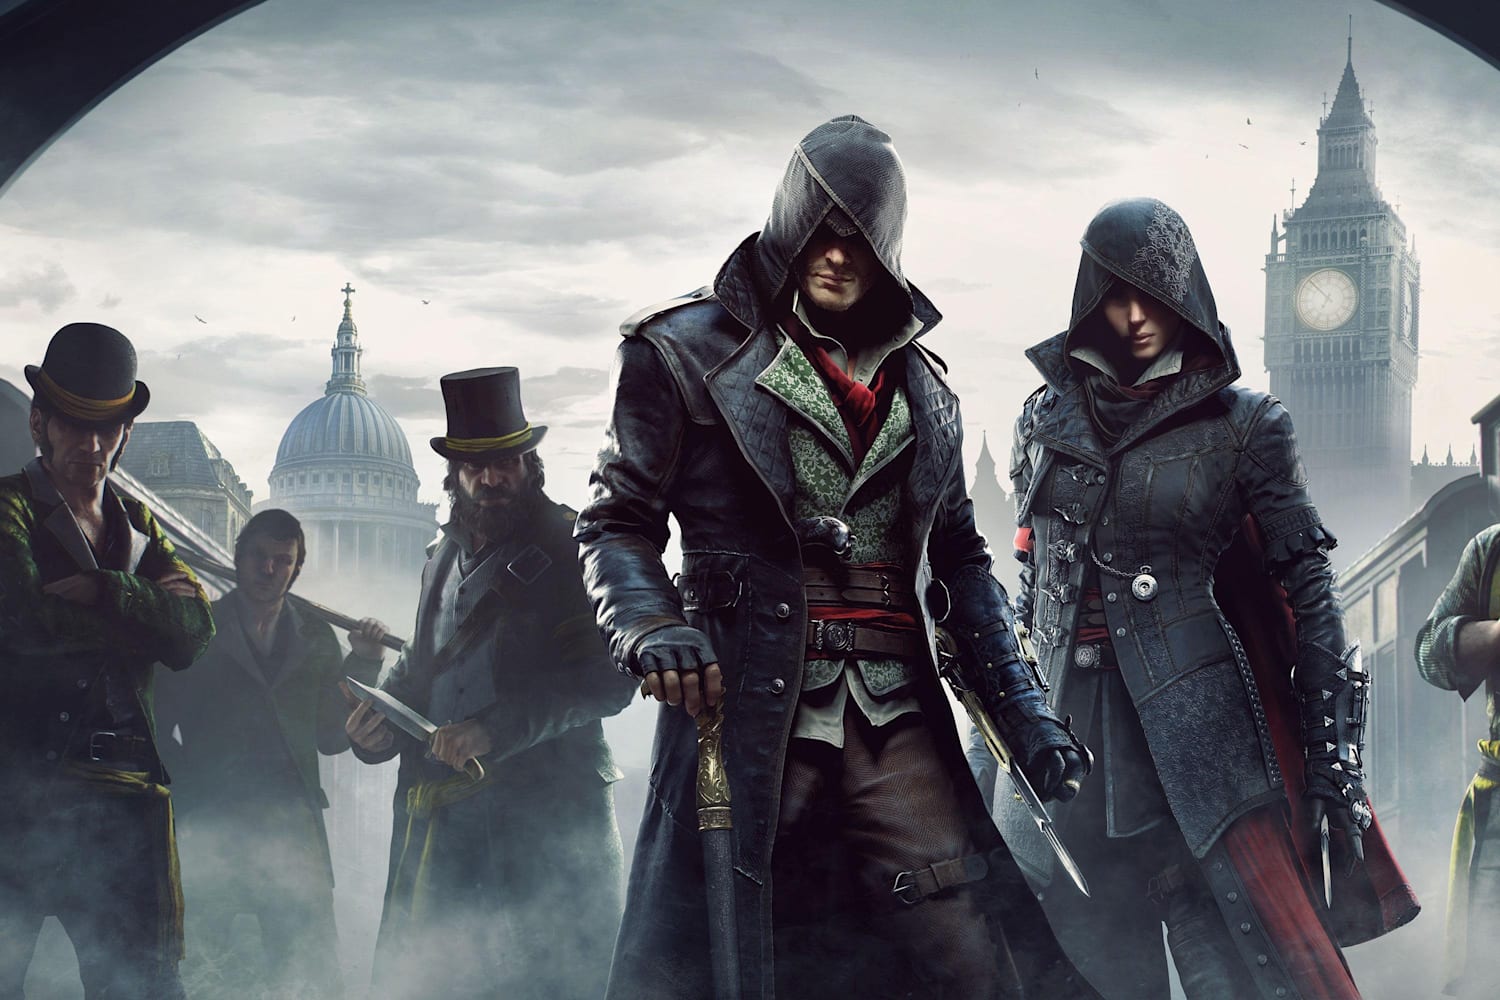 assassin's creed syndicate xbox 360